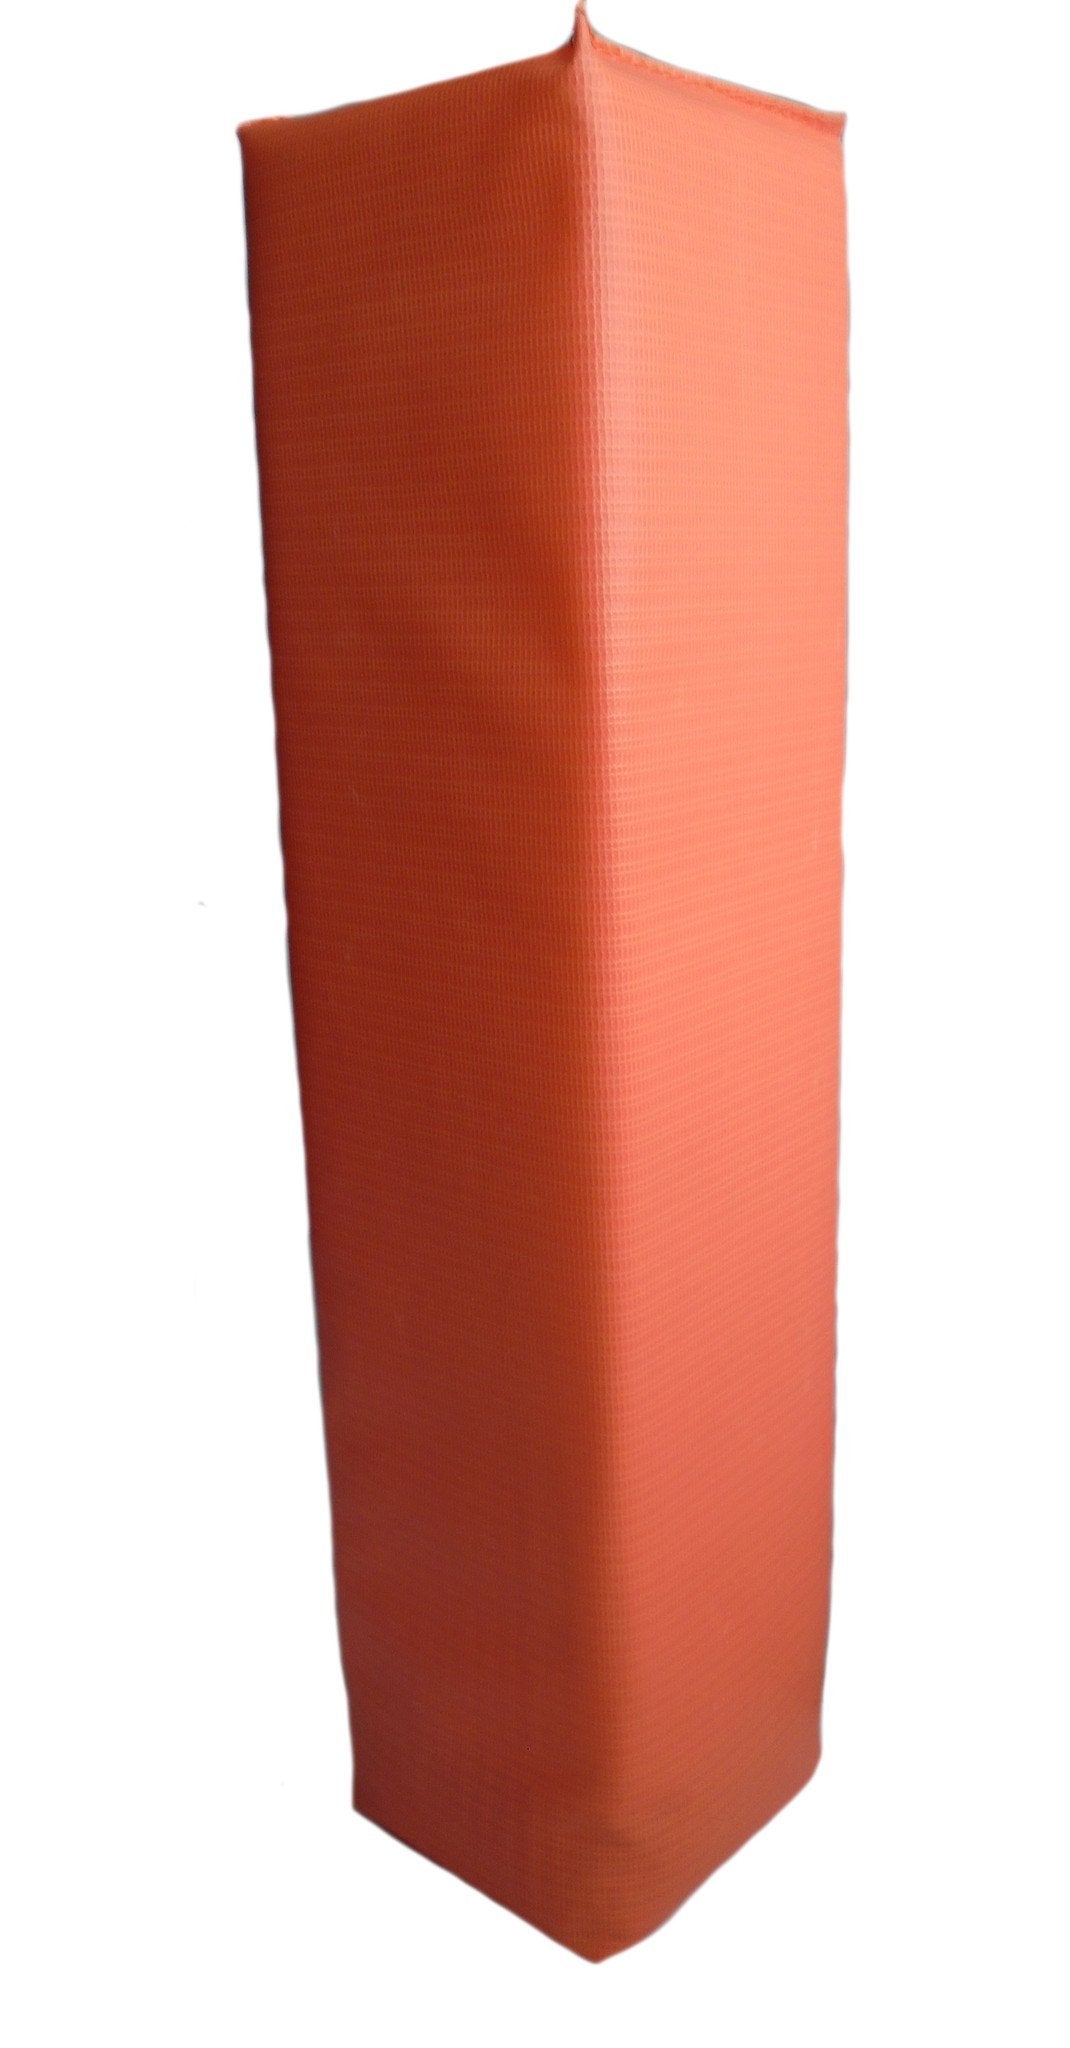 Football End Zone Pylons- Autographed- Andrew Luck Signed Indianapolis Colts TD Pylon PSA/DNA 4